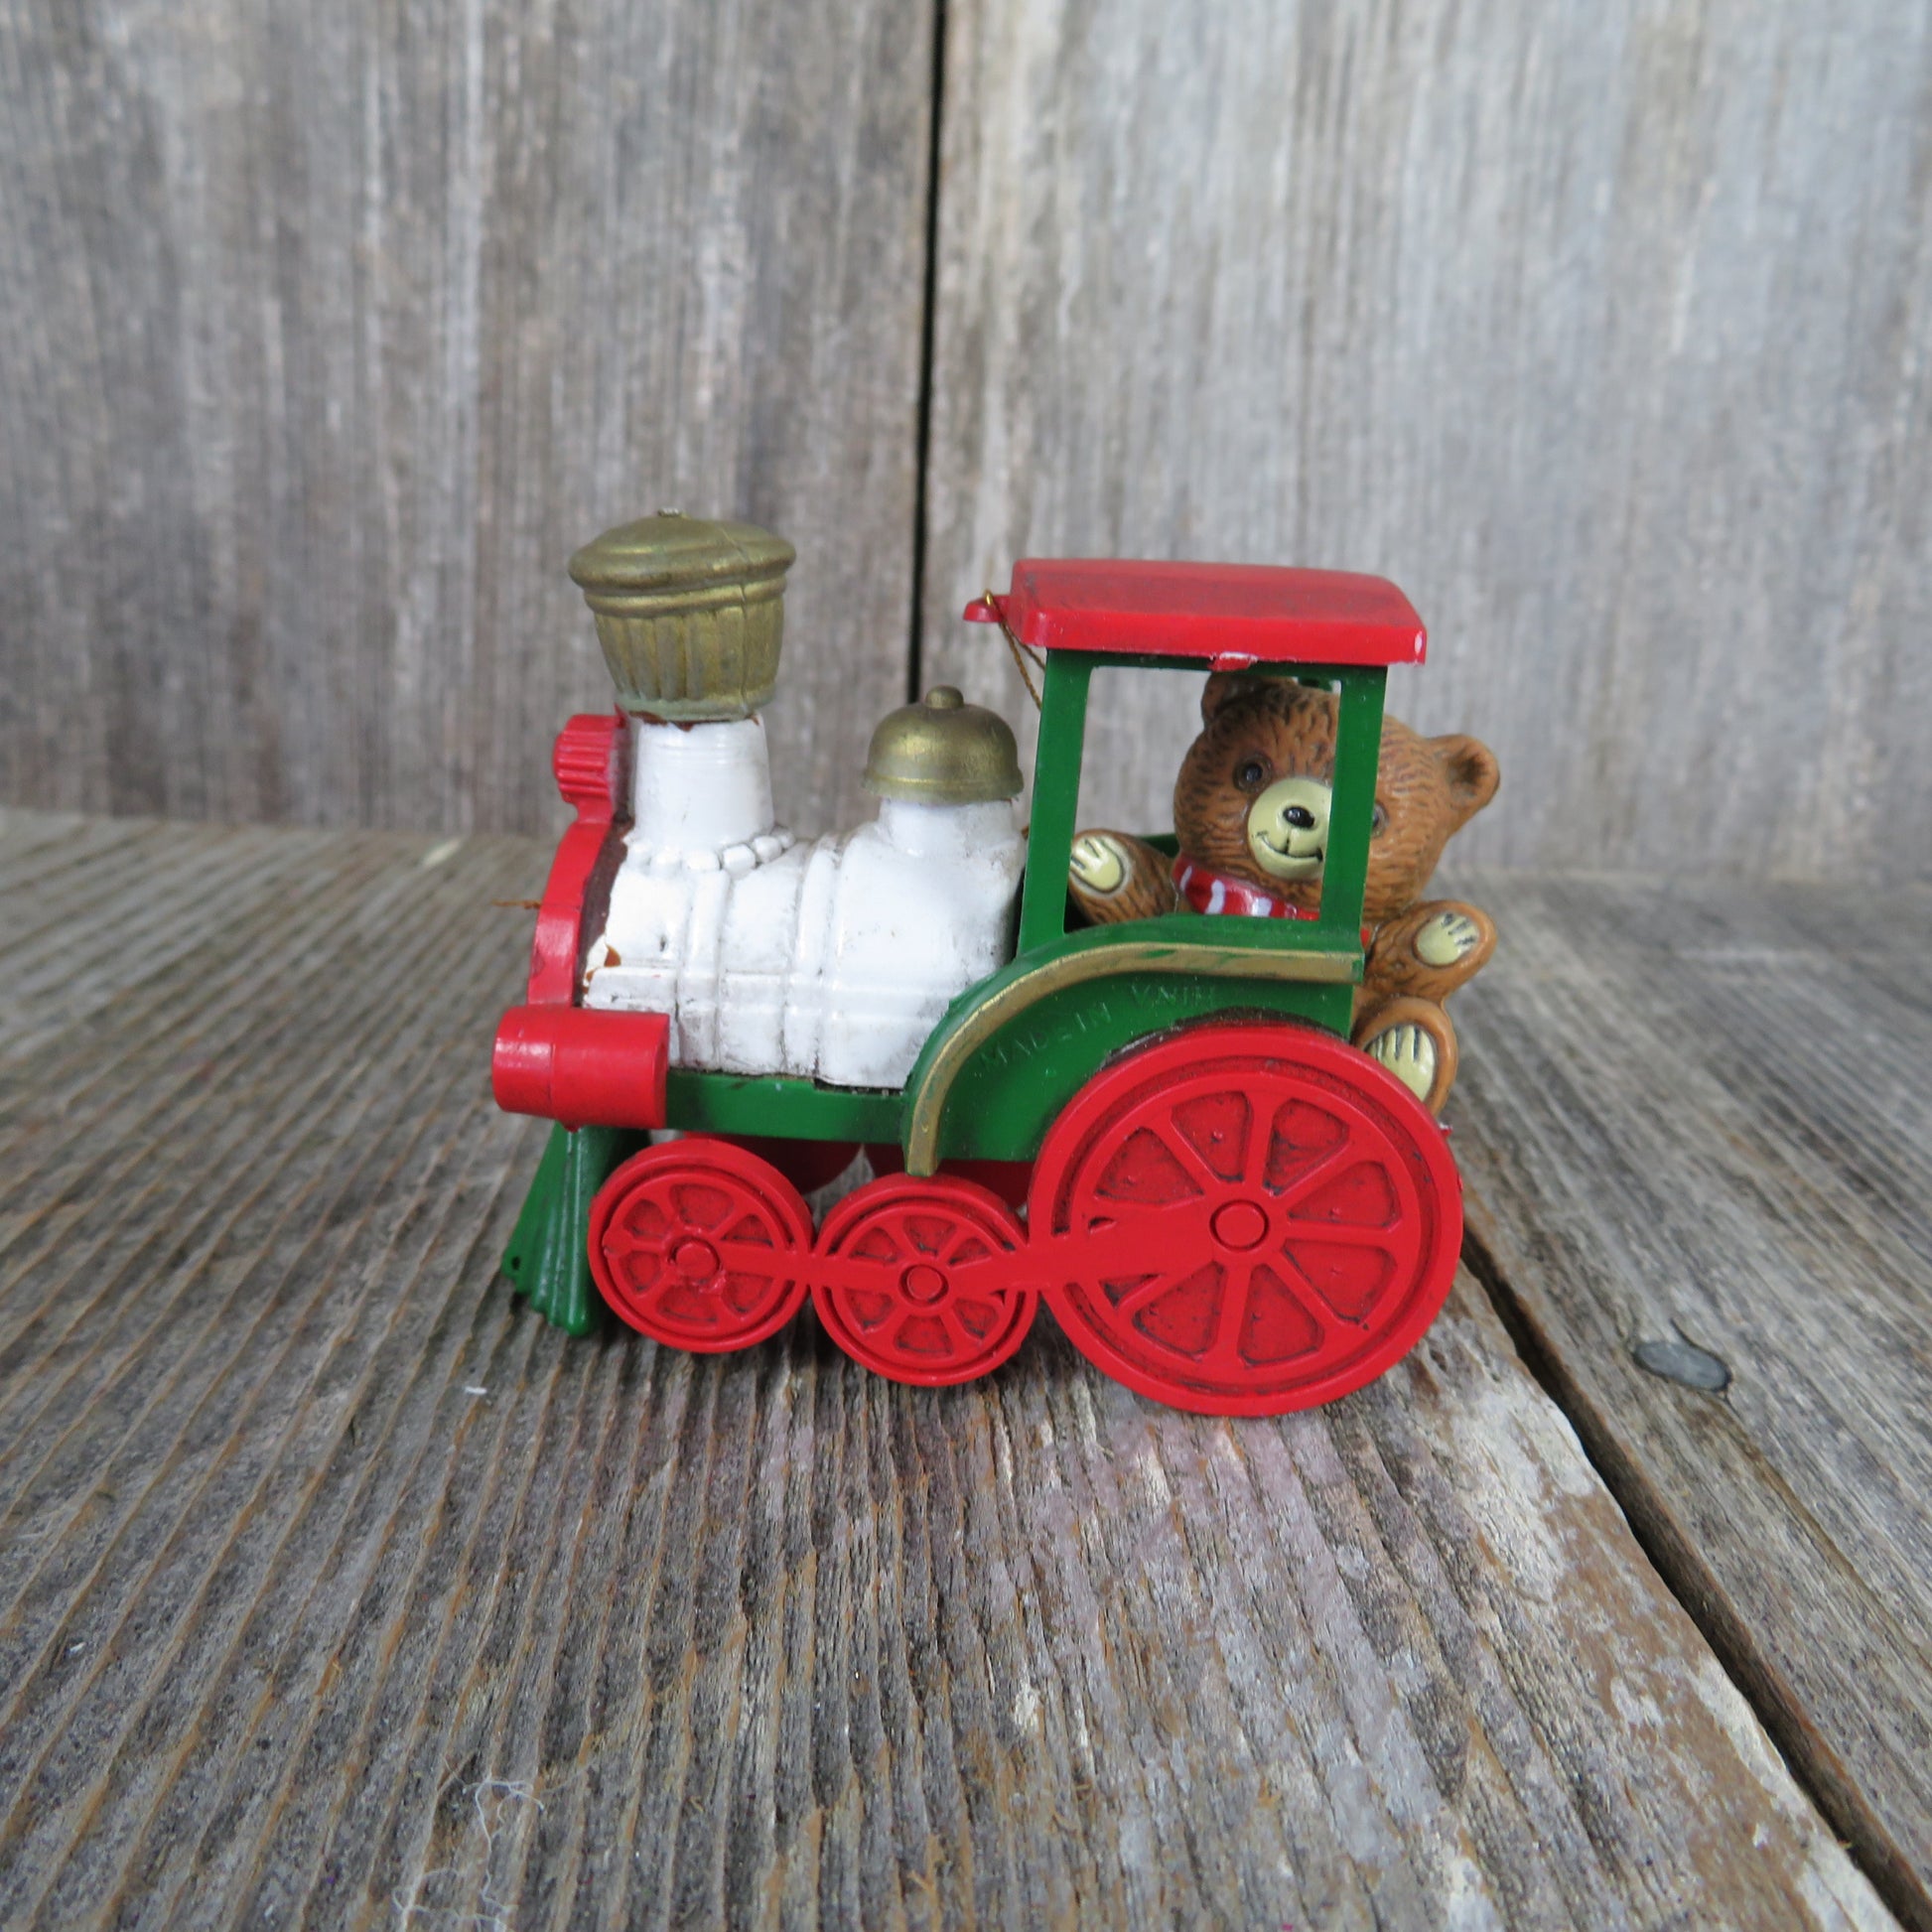 Vintage Teddy Bear Conductor in Train Christmas Ornament Plastic Red White Green - At Grandma's Table